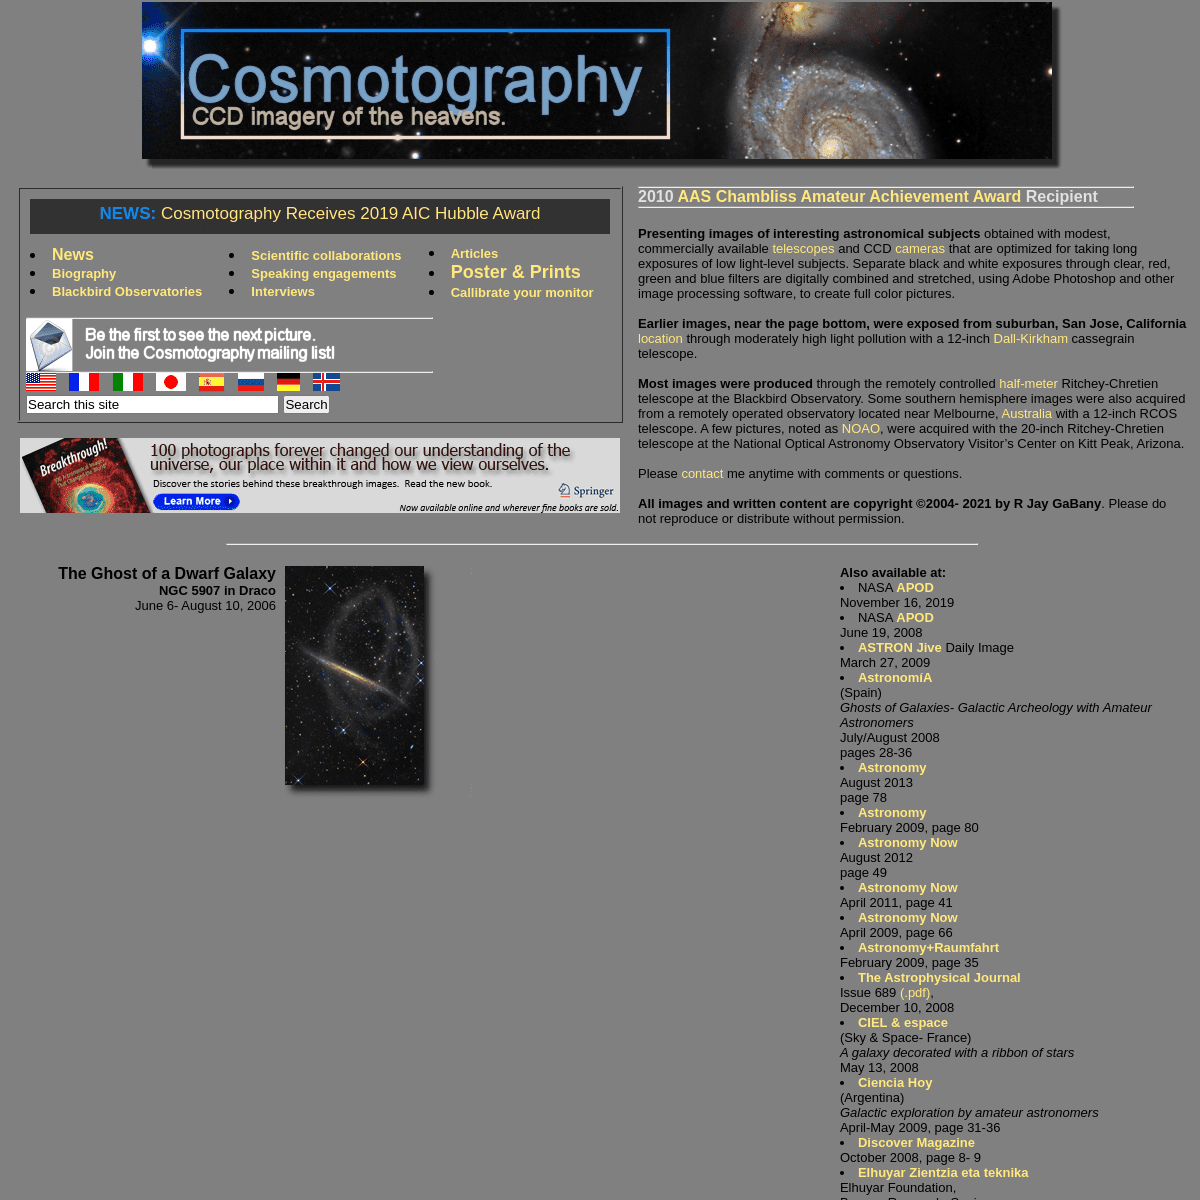 A complete backup of https://cosmotography.com